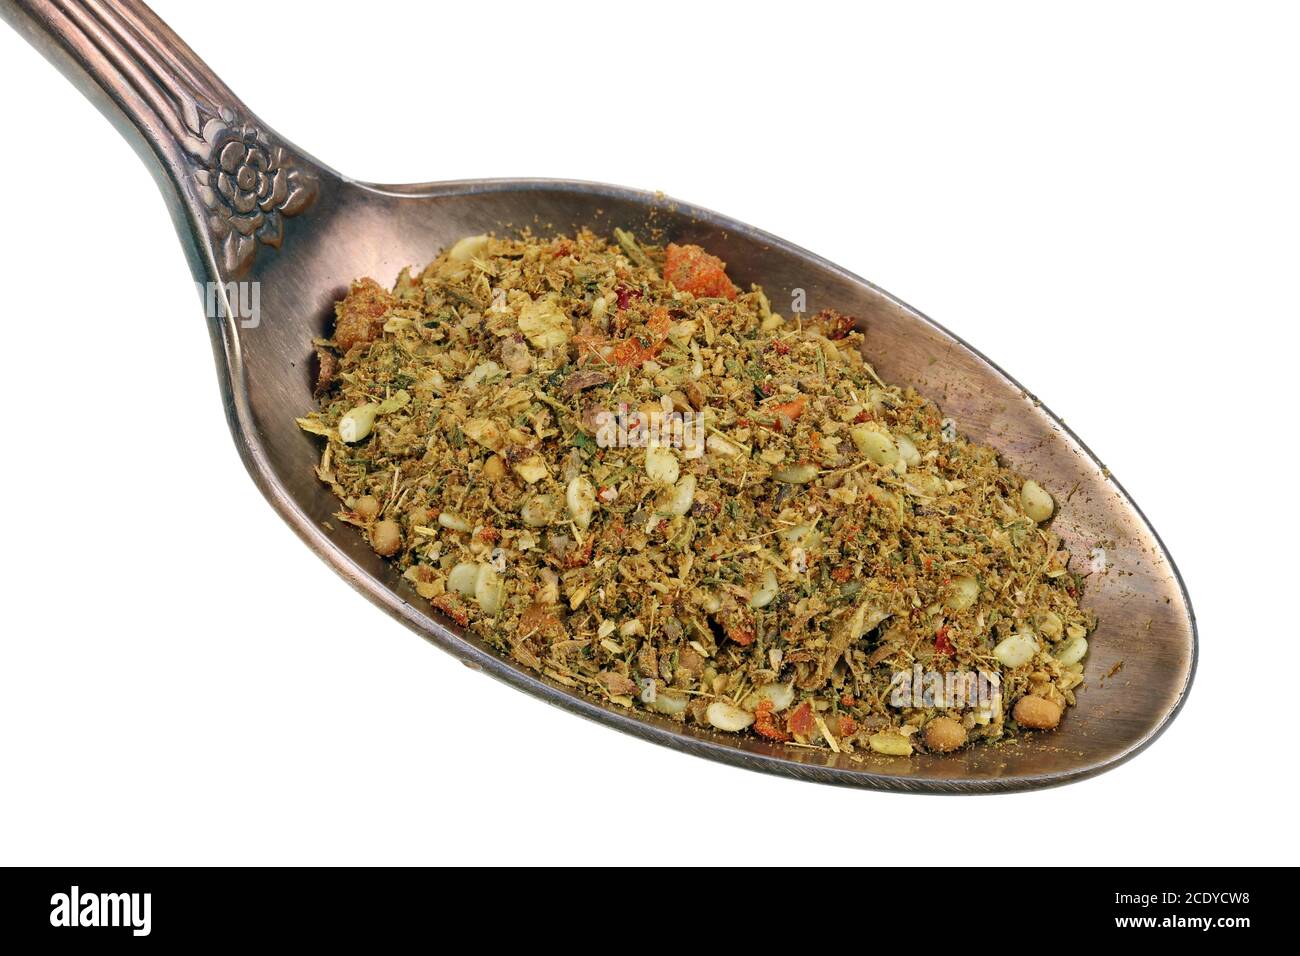 In the old golden spoon there is a small pile of food -  dried  herb spices for salmon fish  isolated macro Stock Photo